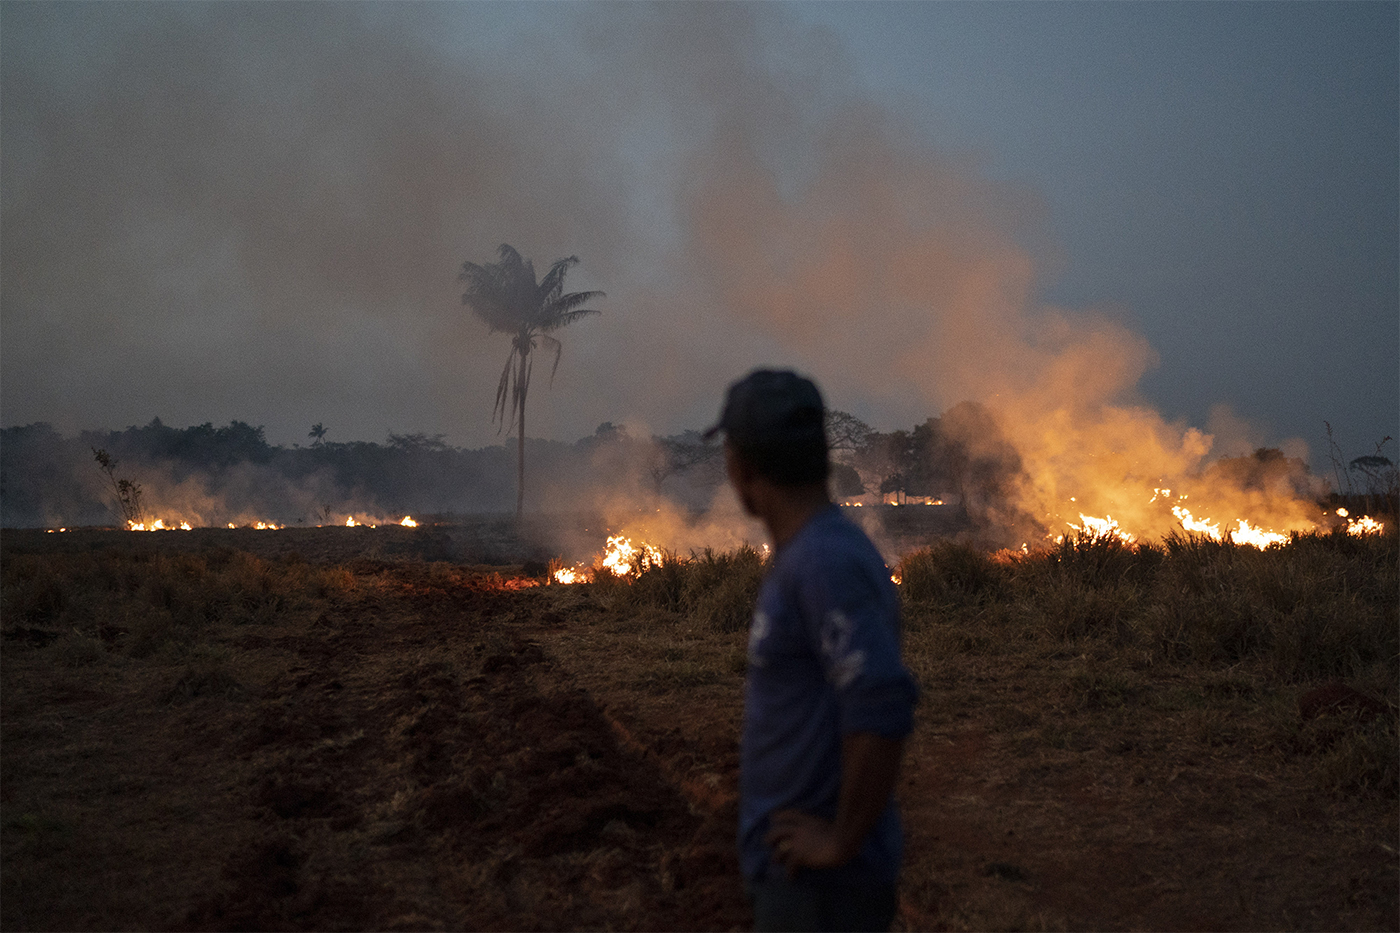 Neri dos Santos Silva watches an encroaching fire threat after digging trenches to keep the flames from spreading to the farm he works on, in the Nova Santa Helena municipality, in the state of Mato Grosso, Brazil, on Friday, Aug. 23, 2019. Under increasing international pressure to contain fires sweeping parts of the Amazon, Brazilian President Jair Bolsonaro recently authorized use of the military to battle the massive blazes. AP Photo/Leo Correa